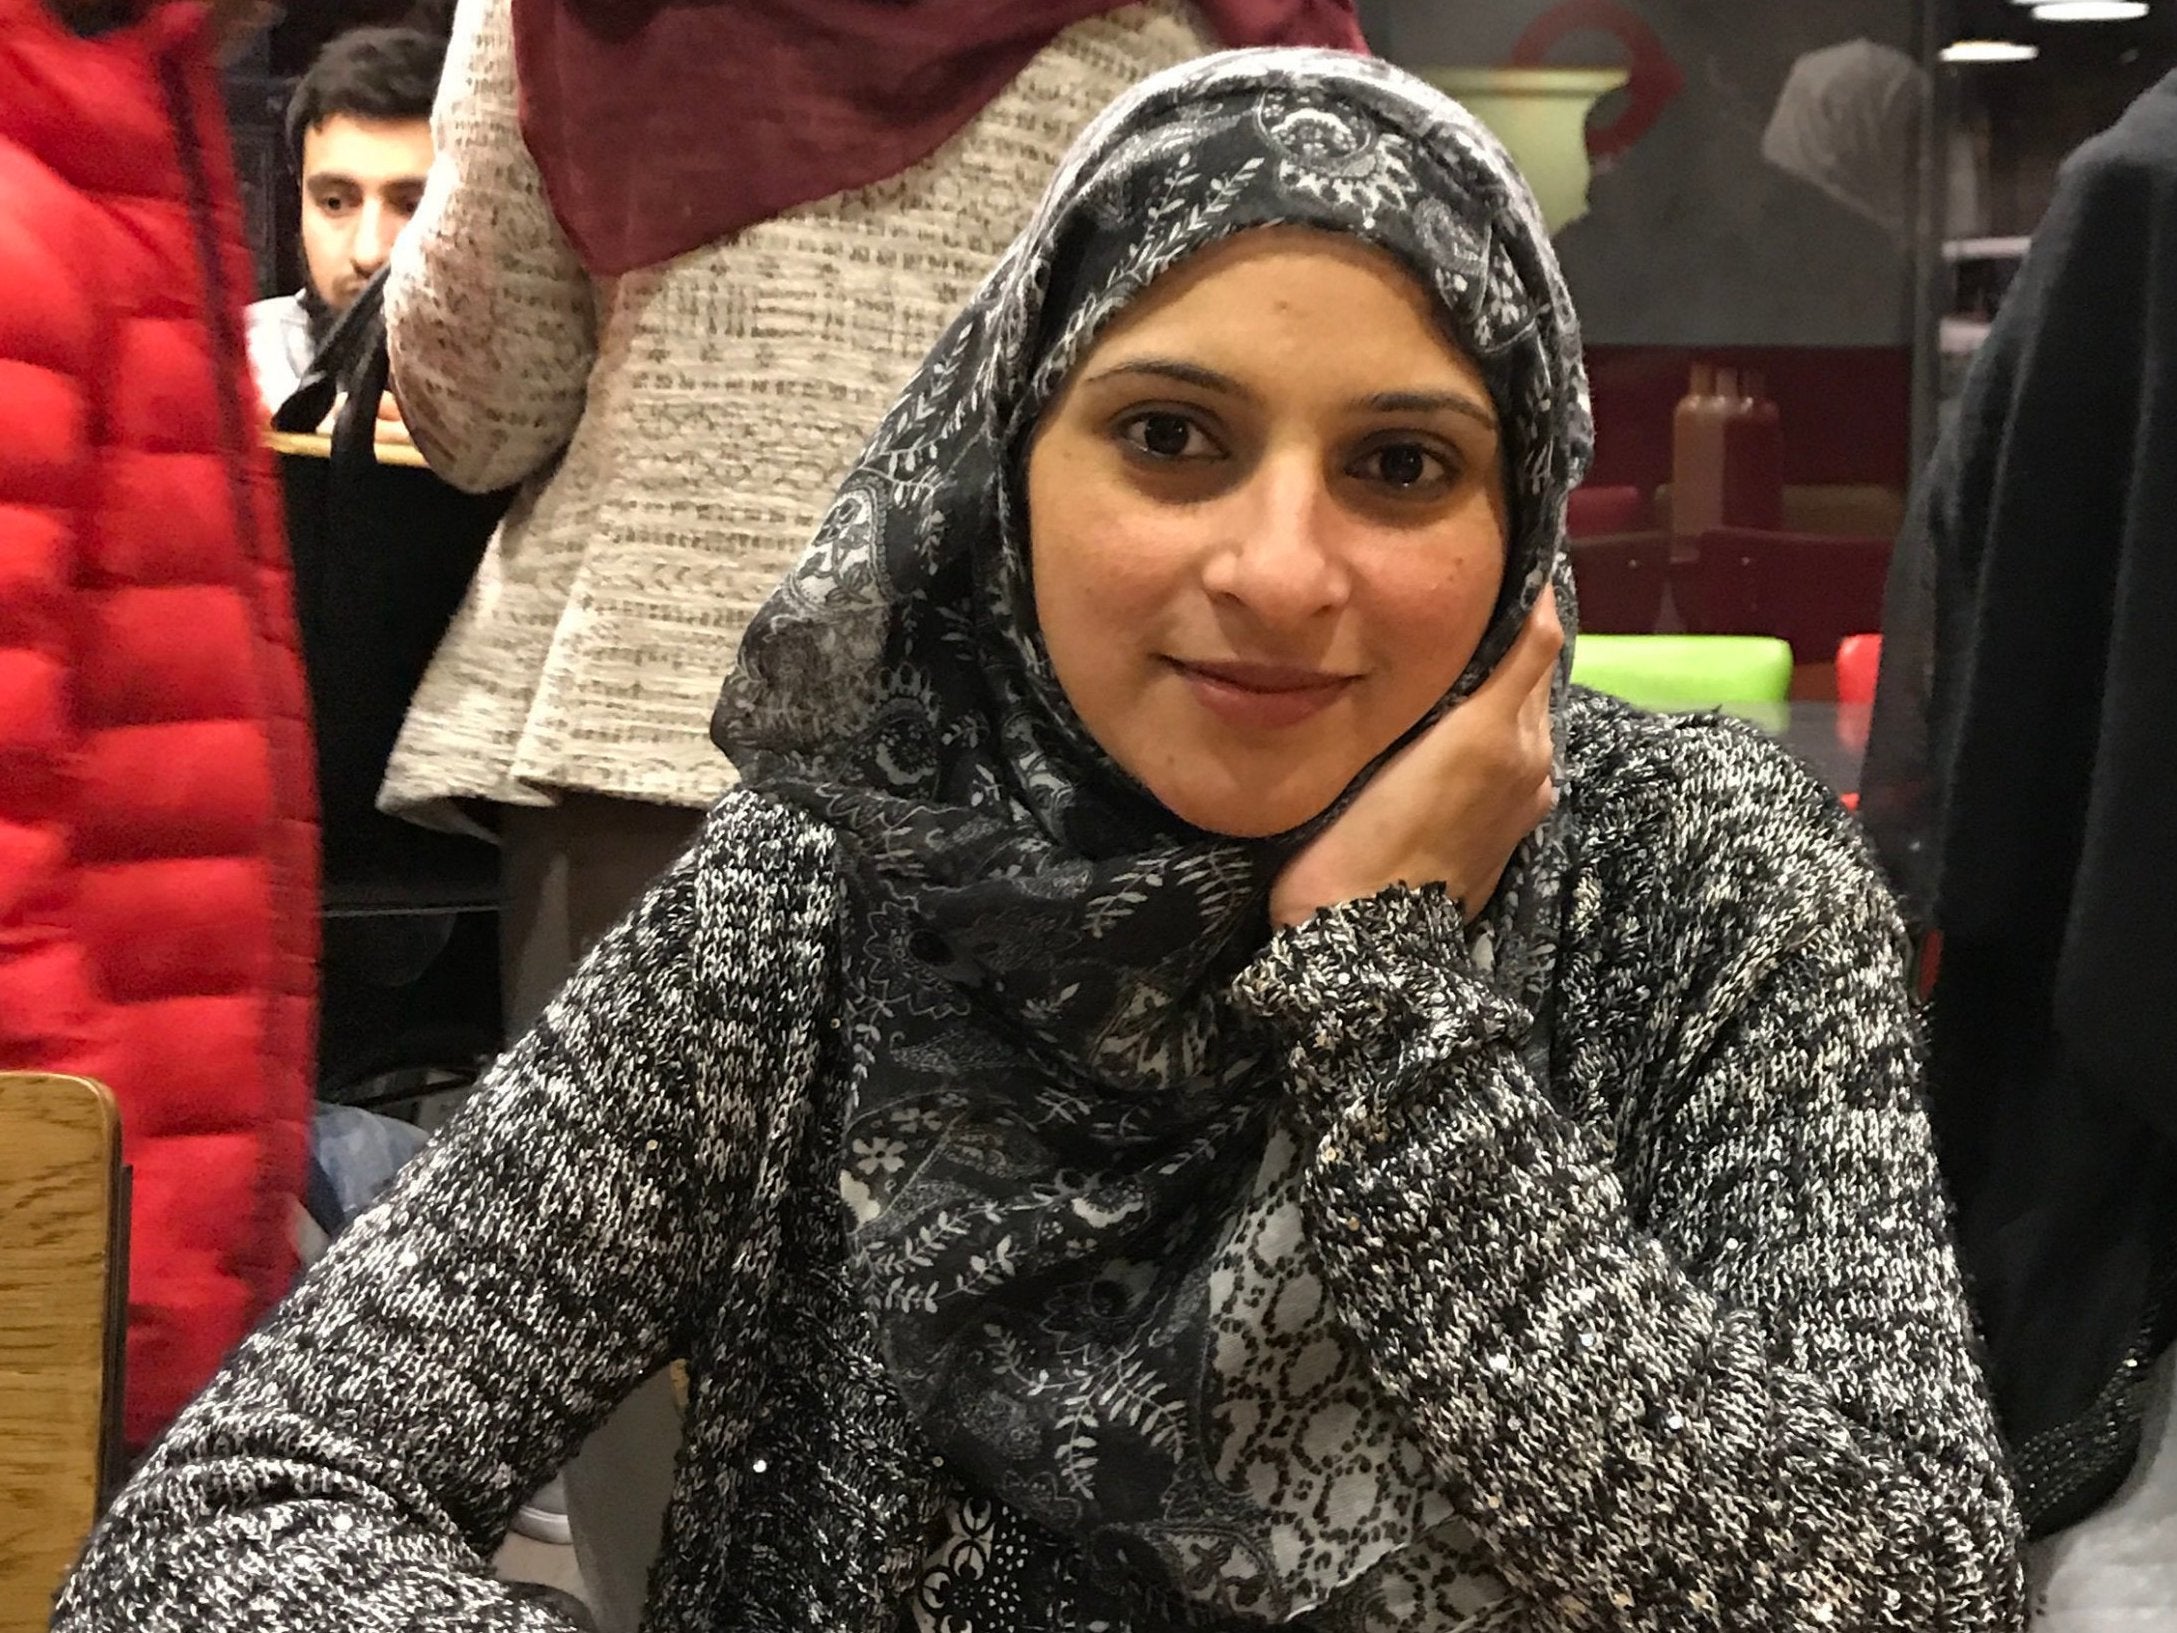 Sana Muhammad was murdered with a crossbow by her ex-husband in 2018